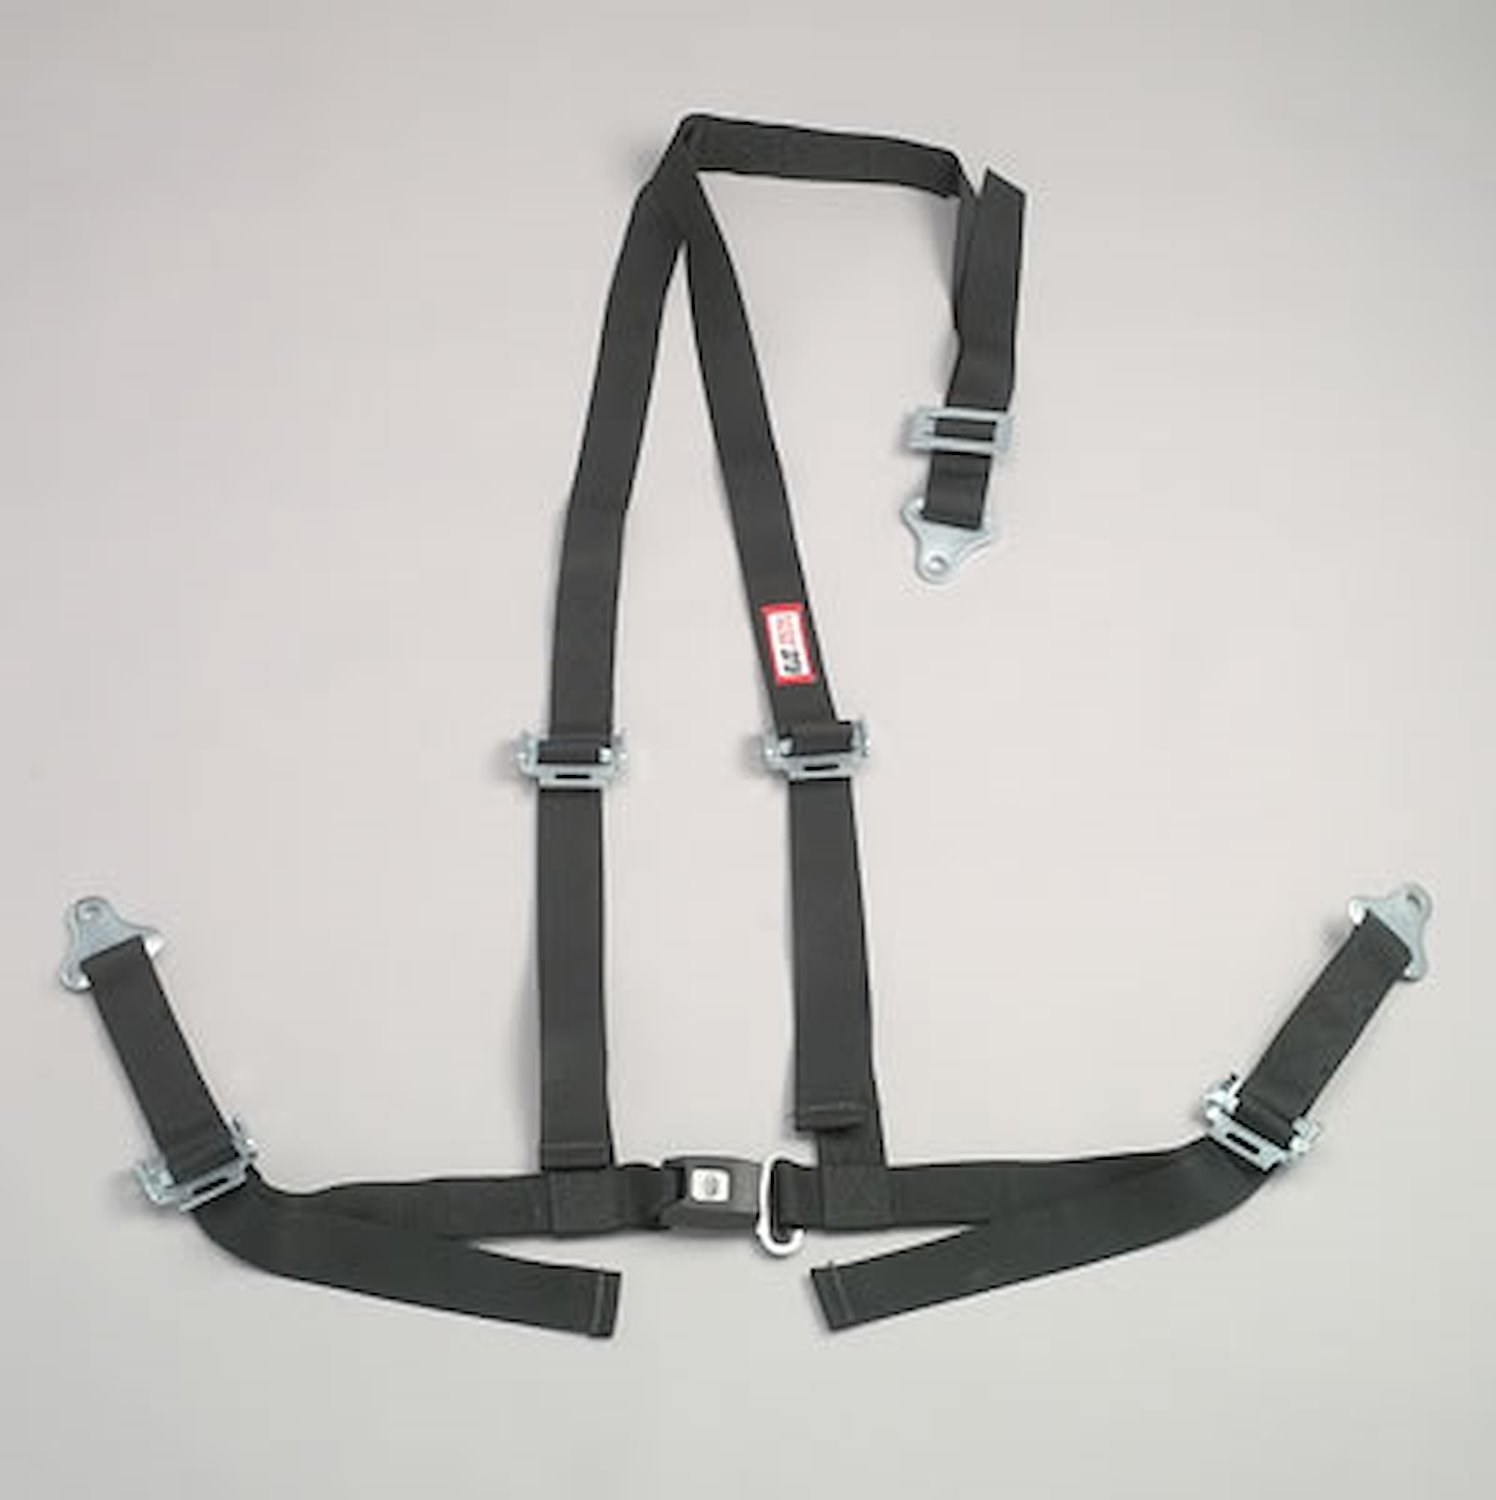 NON-SFI B&T HARNESS 2 PULL DOWN Lap Belt SNAP 2 S. H. Individual ROLL BAR Mount WRAP/SNAP w/STERNUM STRAP RED